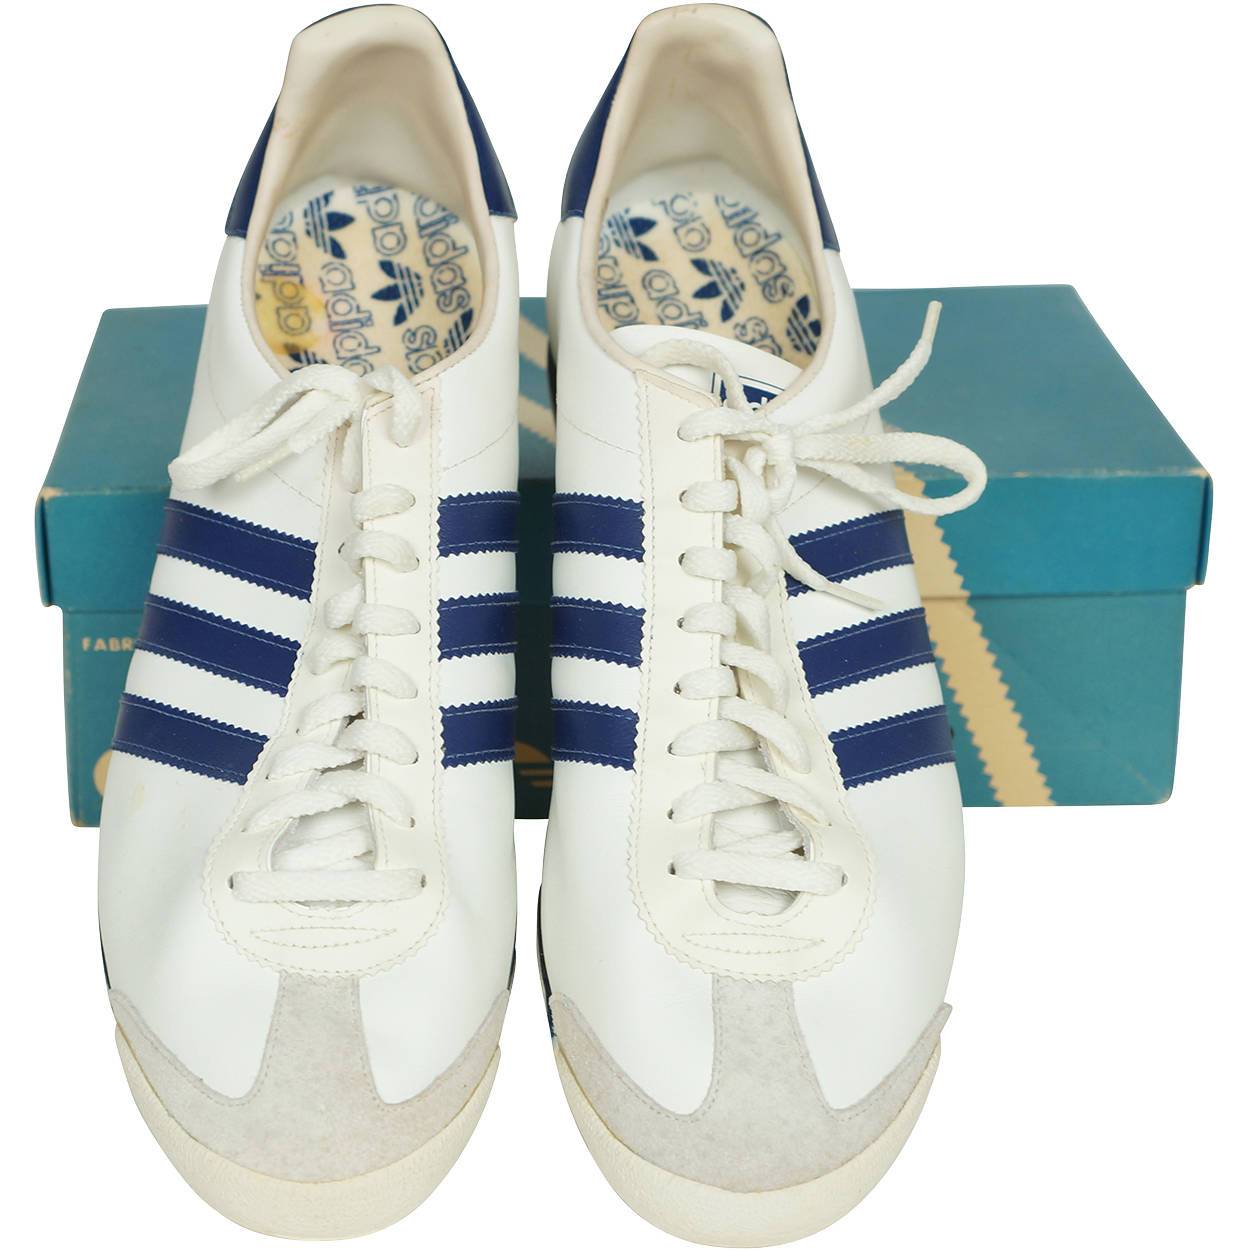 adidas 1970s shoes